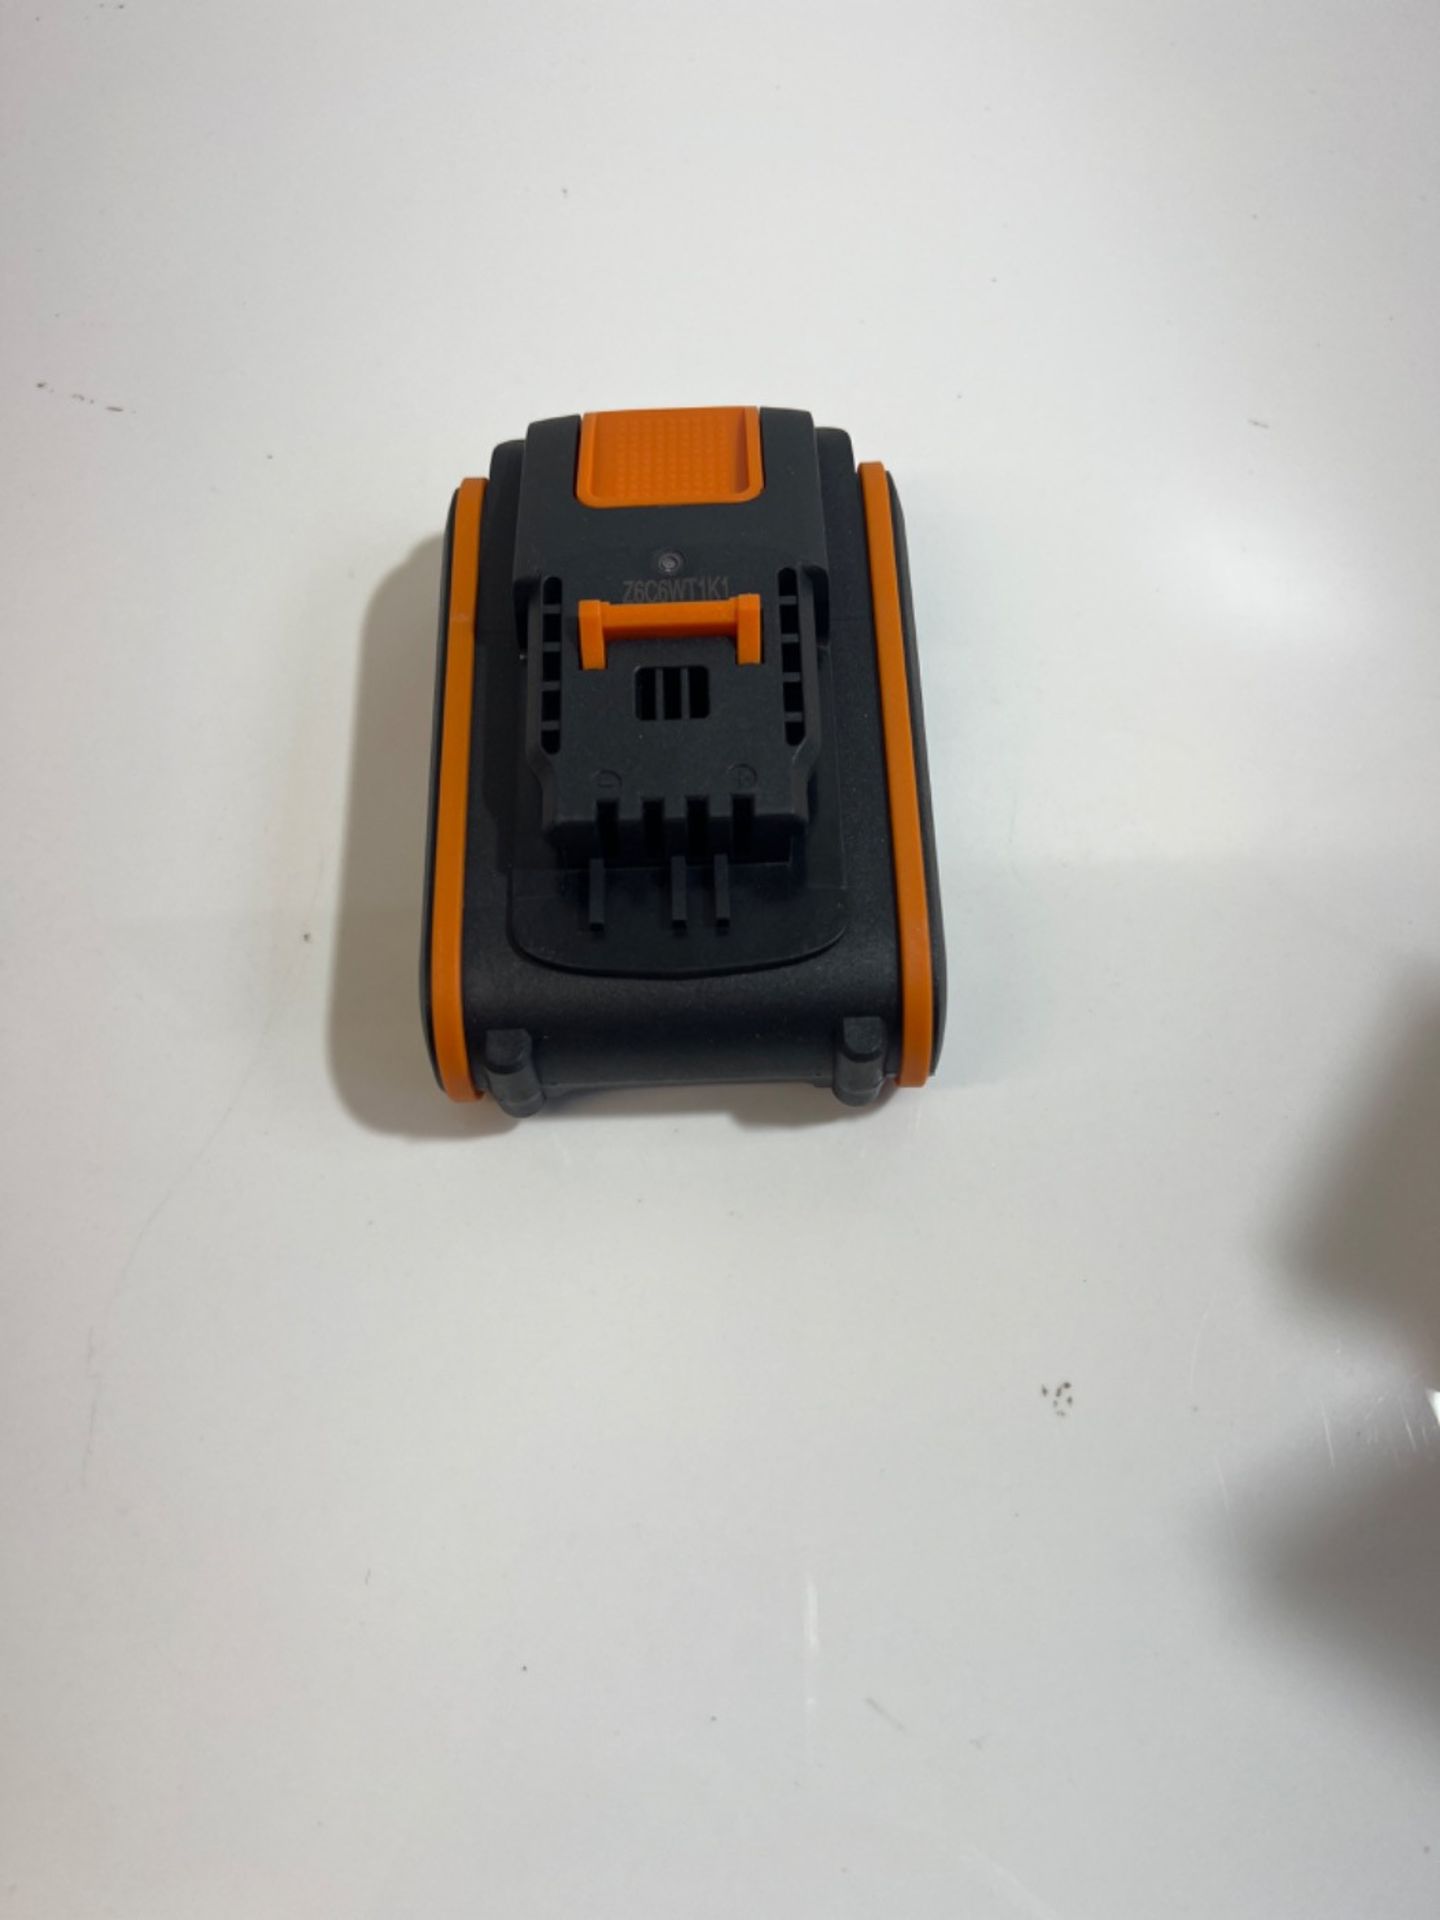 WORX WA3639 18V (20V Max) 2.0Ah Battery Pack with Battery Indicator - Image 3 of 3